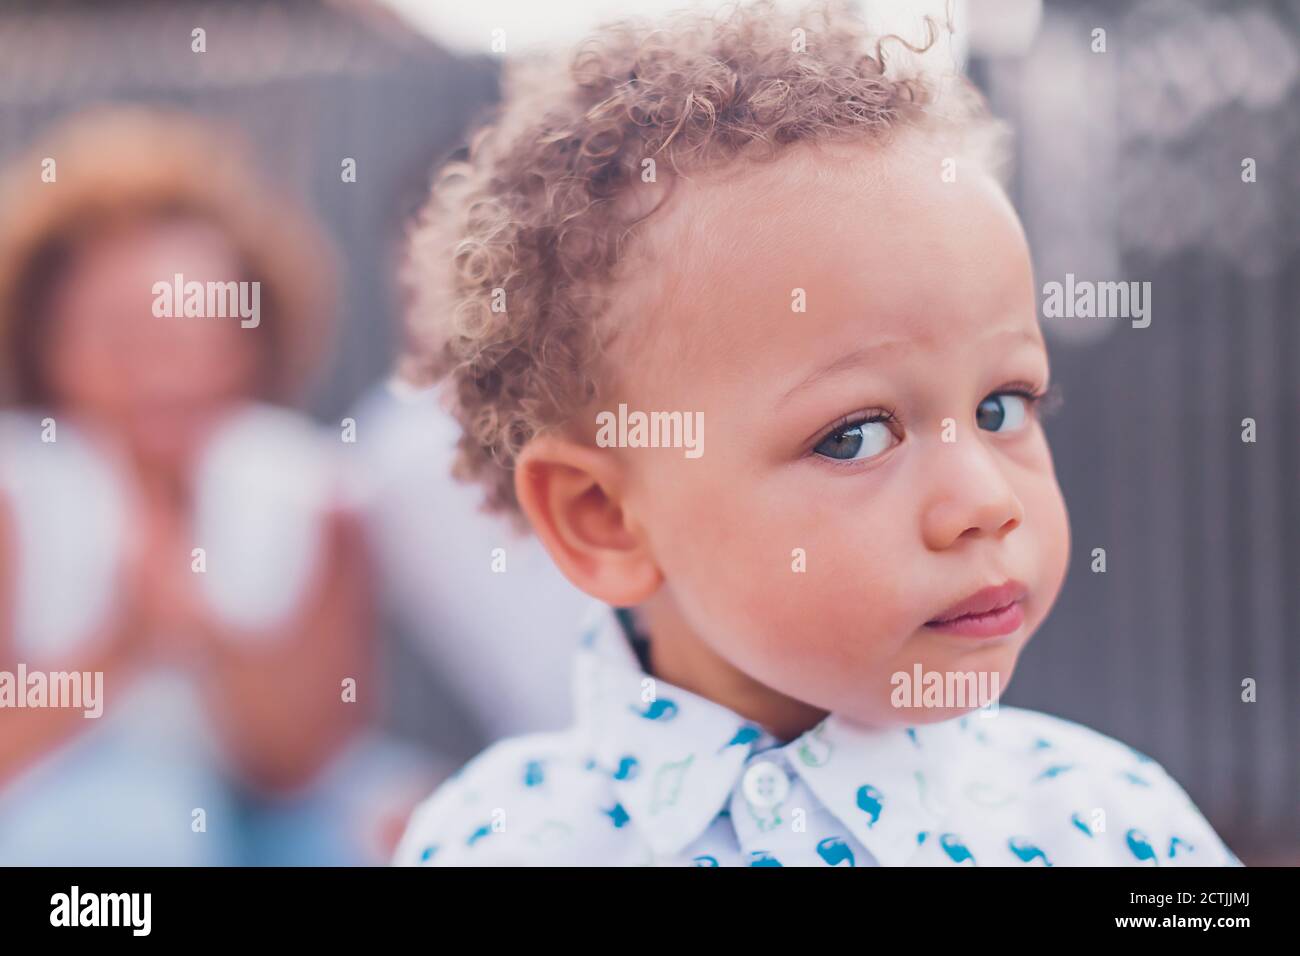 Mixed race baby boy with blue eyes looking at camera Stock Photo - Alamy